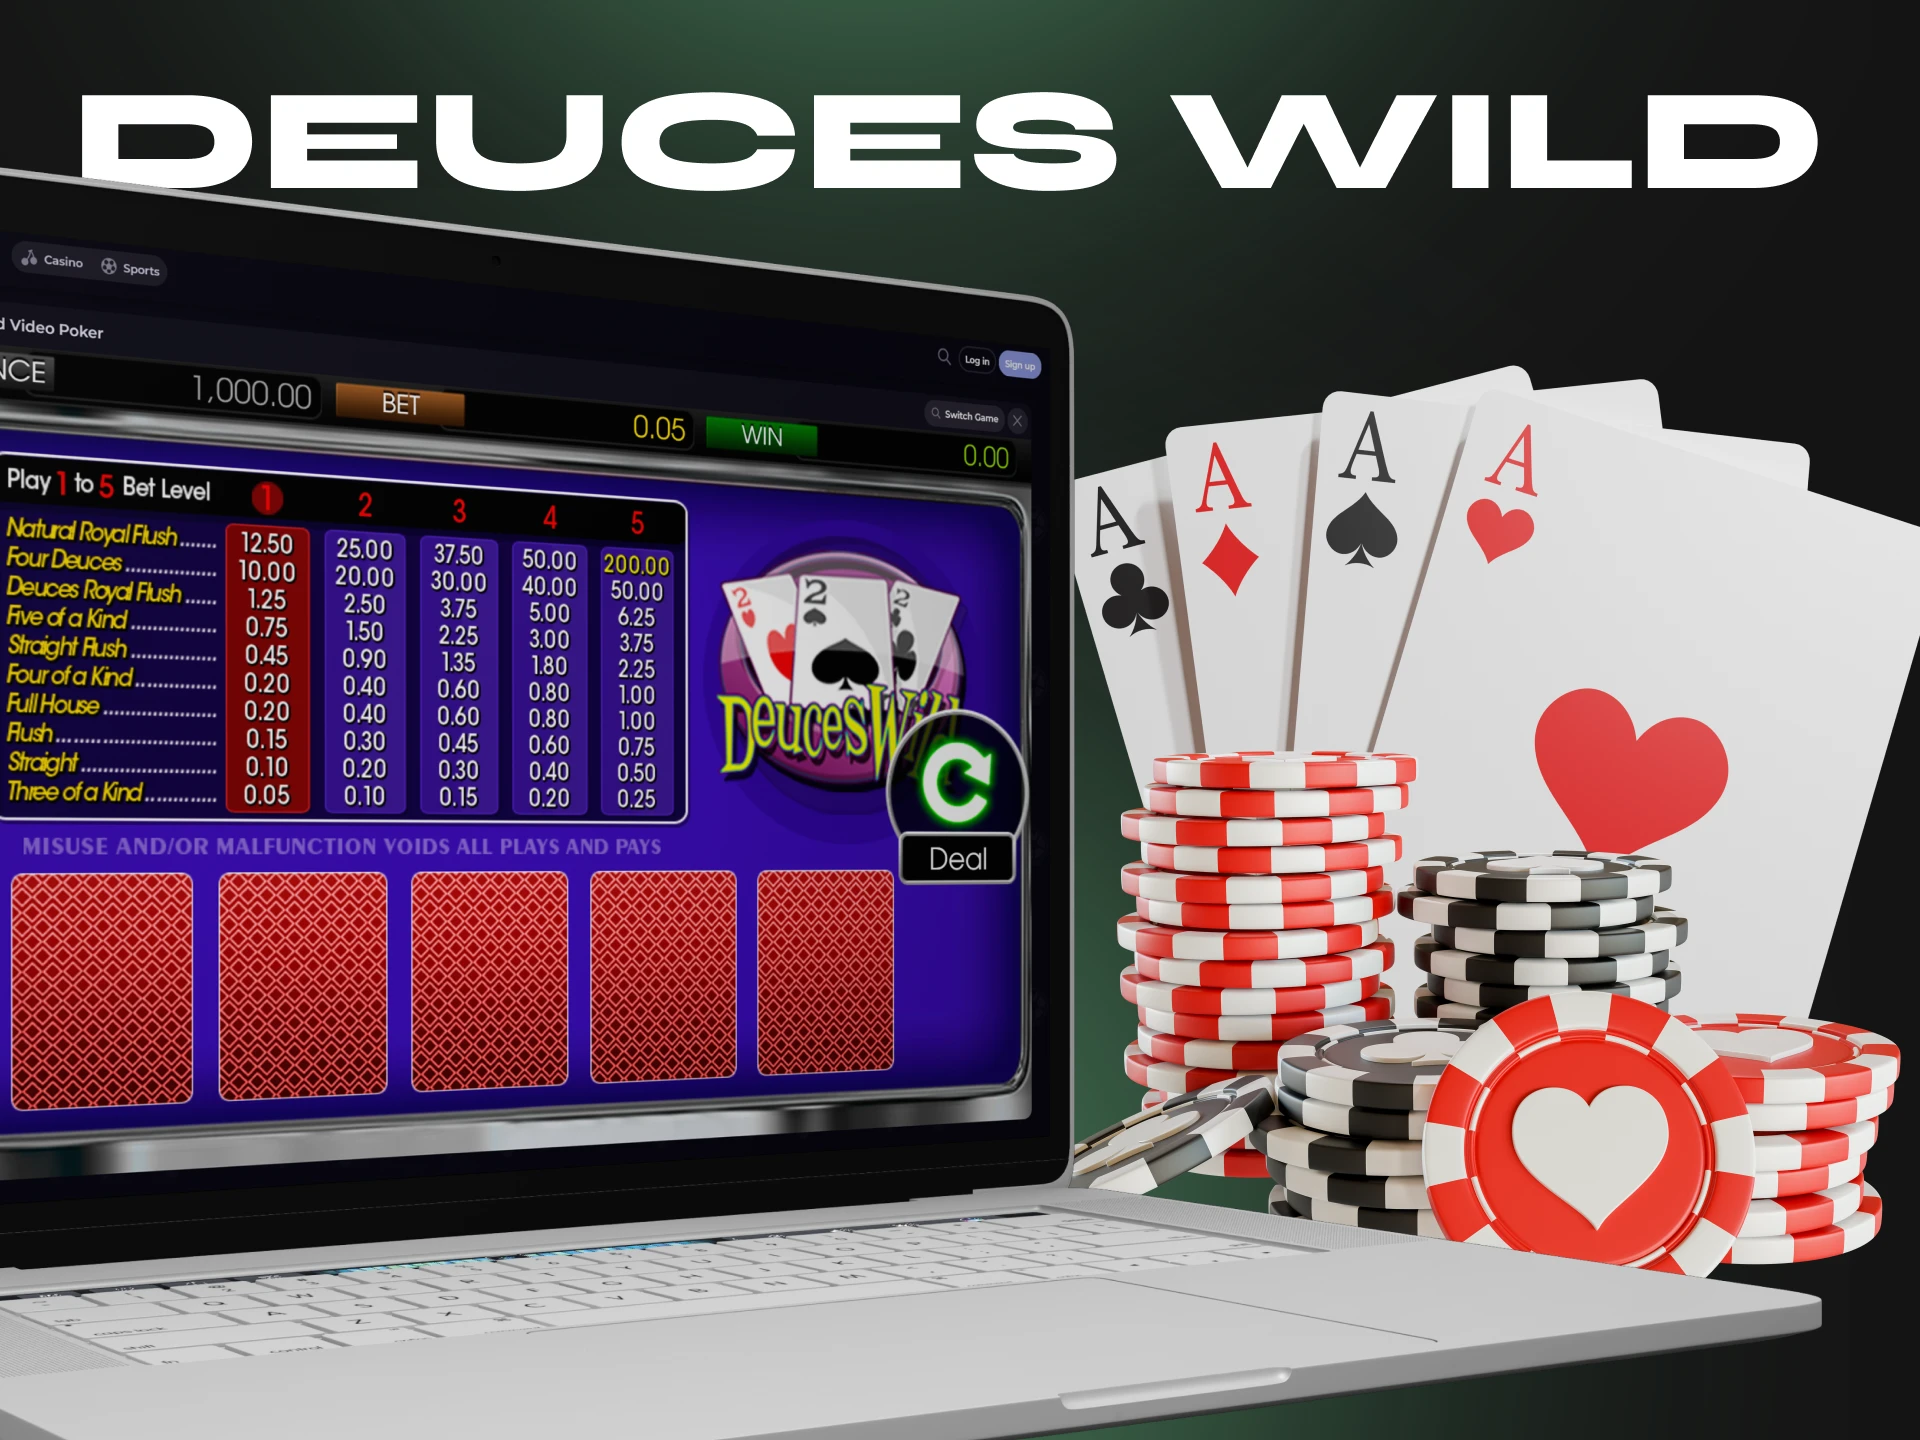 If you like poker, try playing Deuces Wild at a crypto casino.